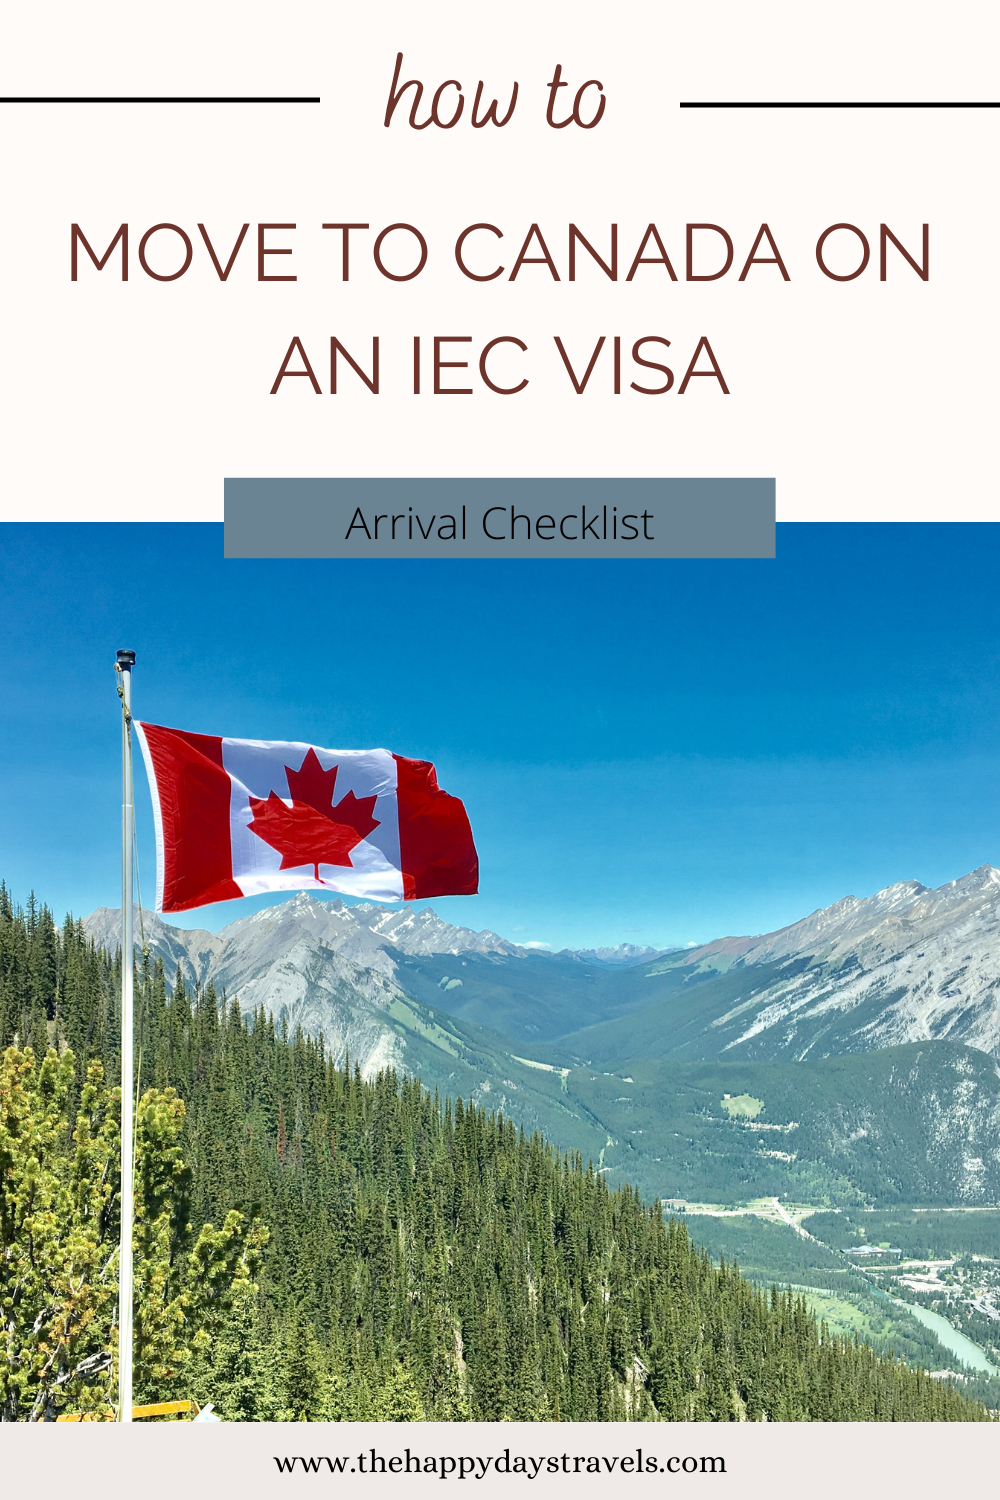 Pin image for 'how to move to Canada on an IEC visa' and 'arrival checklist' with image of Canada flag flying amongst Canadian mountains